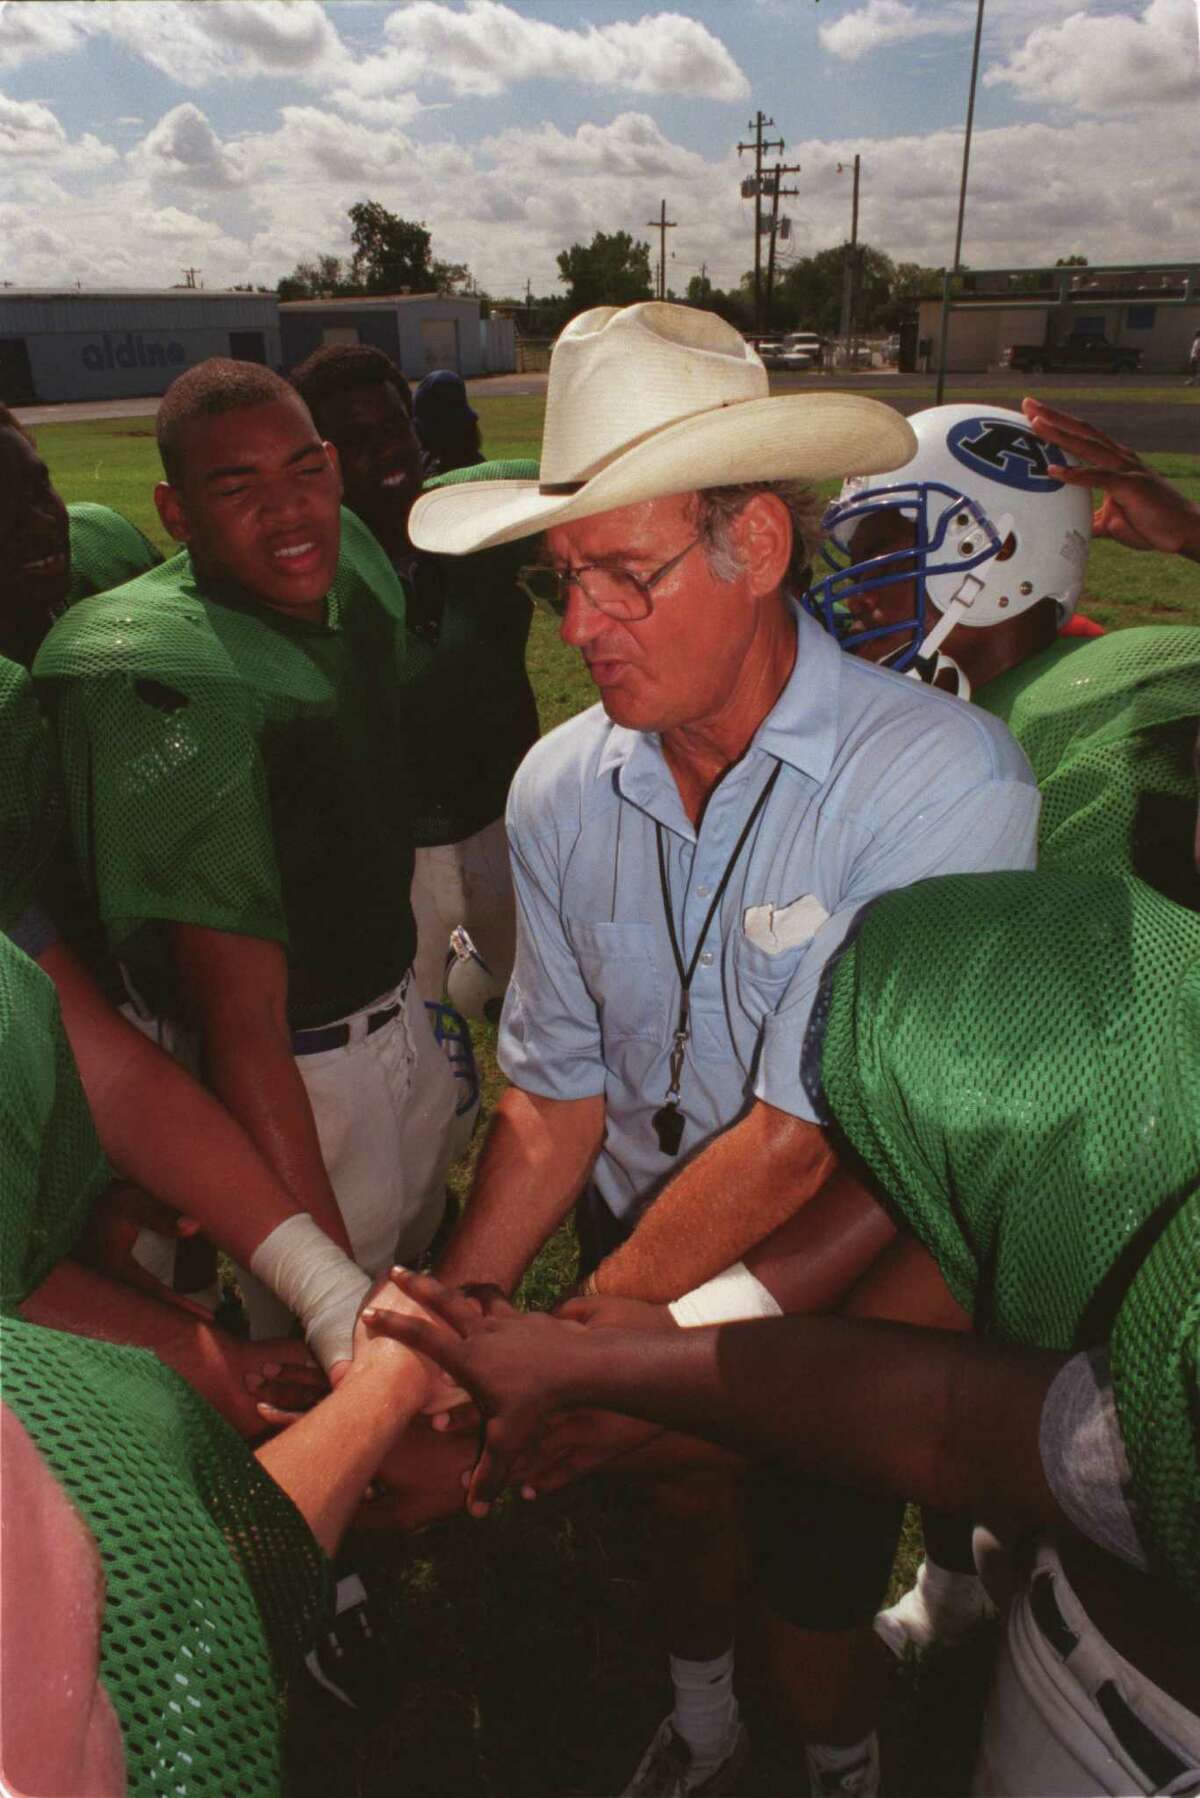 Aldine coach Bill Smith, who is going for his 200th coaching victory on Friday, concludes his team's practice, Monday (9/6/99), with a joined hands pep talk. Photo by Steve Ueckert / Chronicle HOUCHRON CAPTION (09/07/1999): Aldine coach Bill Smith tried to maintain a business-as-usual approach at practice Monday.